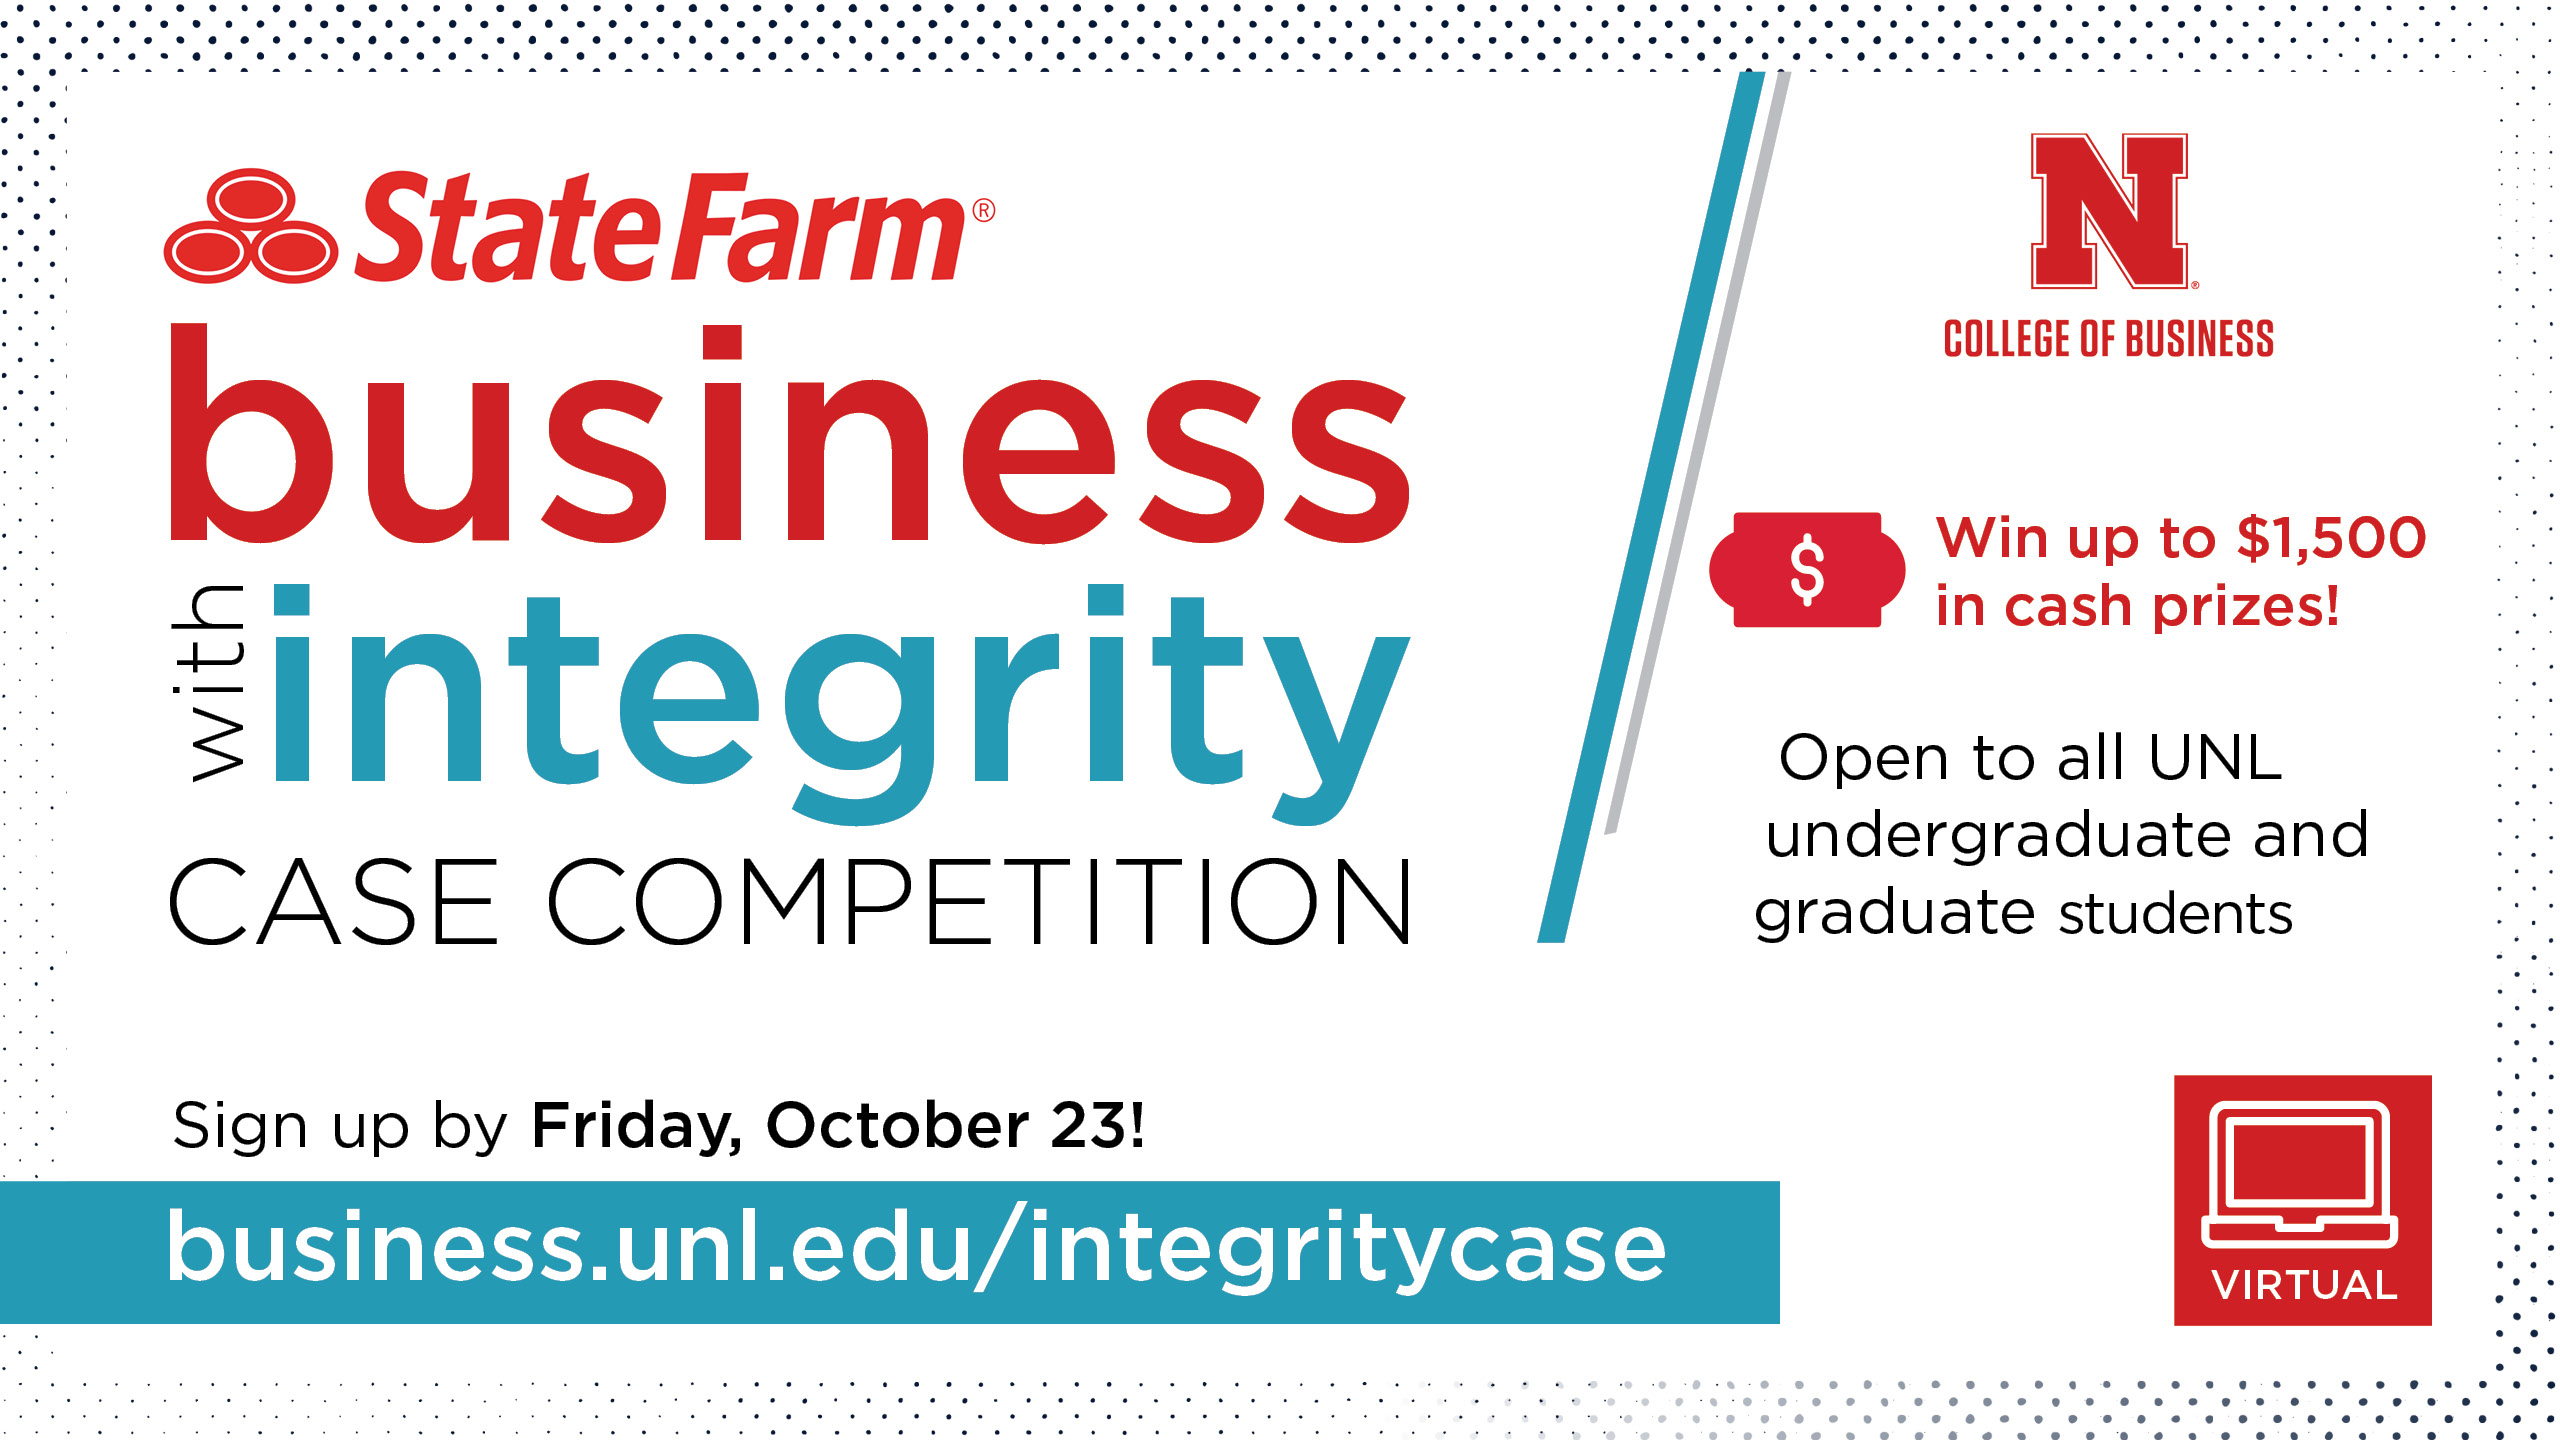 Students at Nebraska can apply their values and skills to a real-world case while competing for up to $1,500 in the inaugural State Farm Business with Integrity Case Competition.